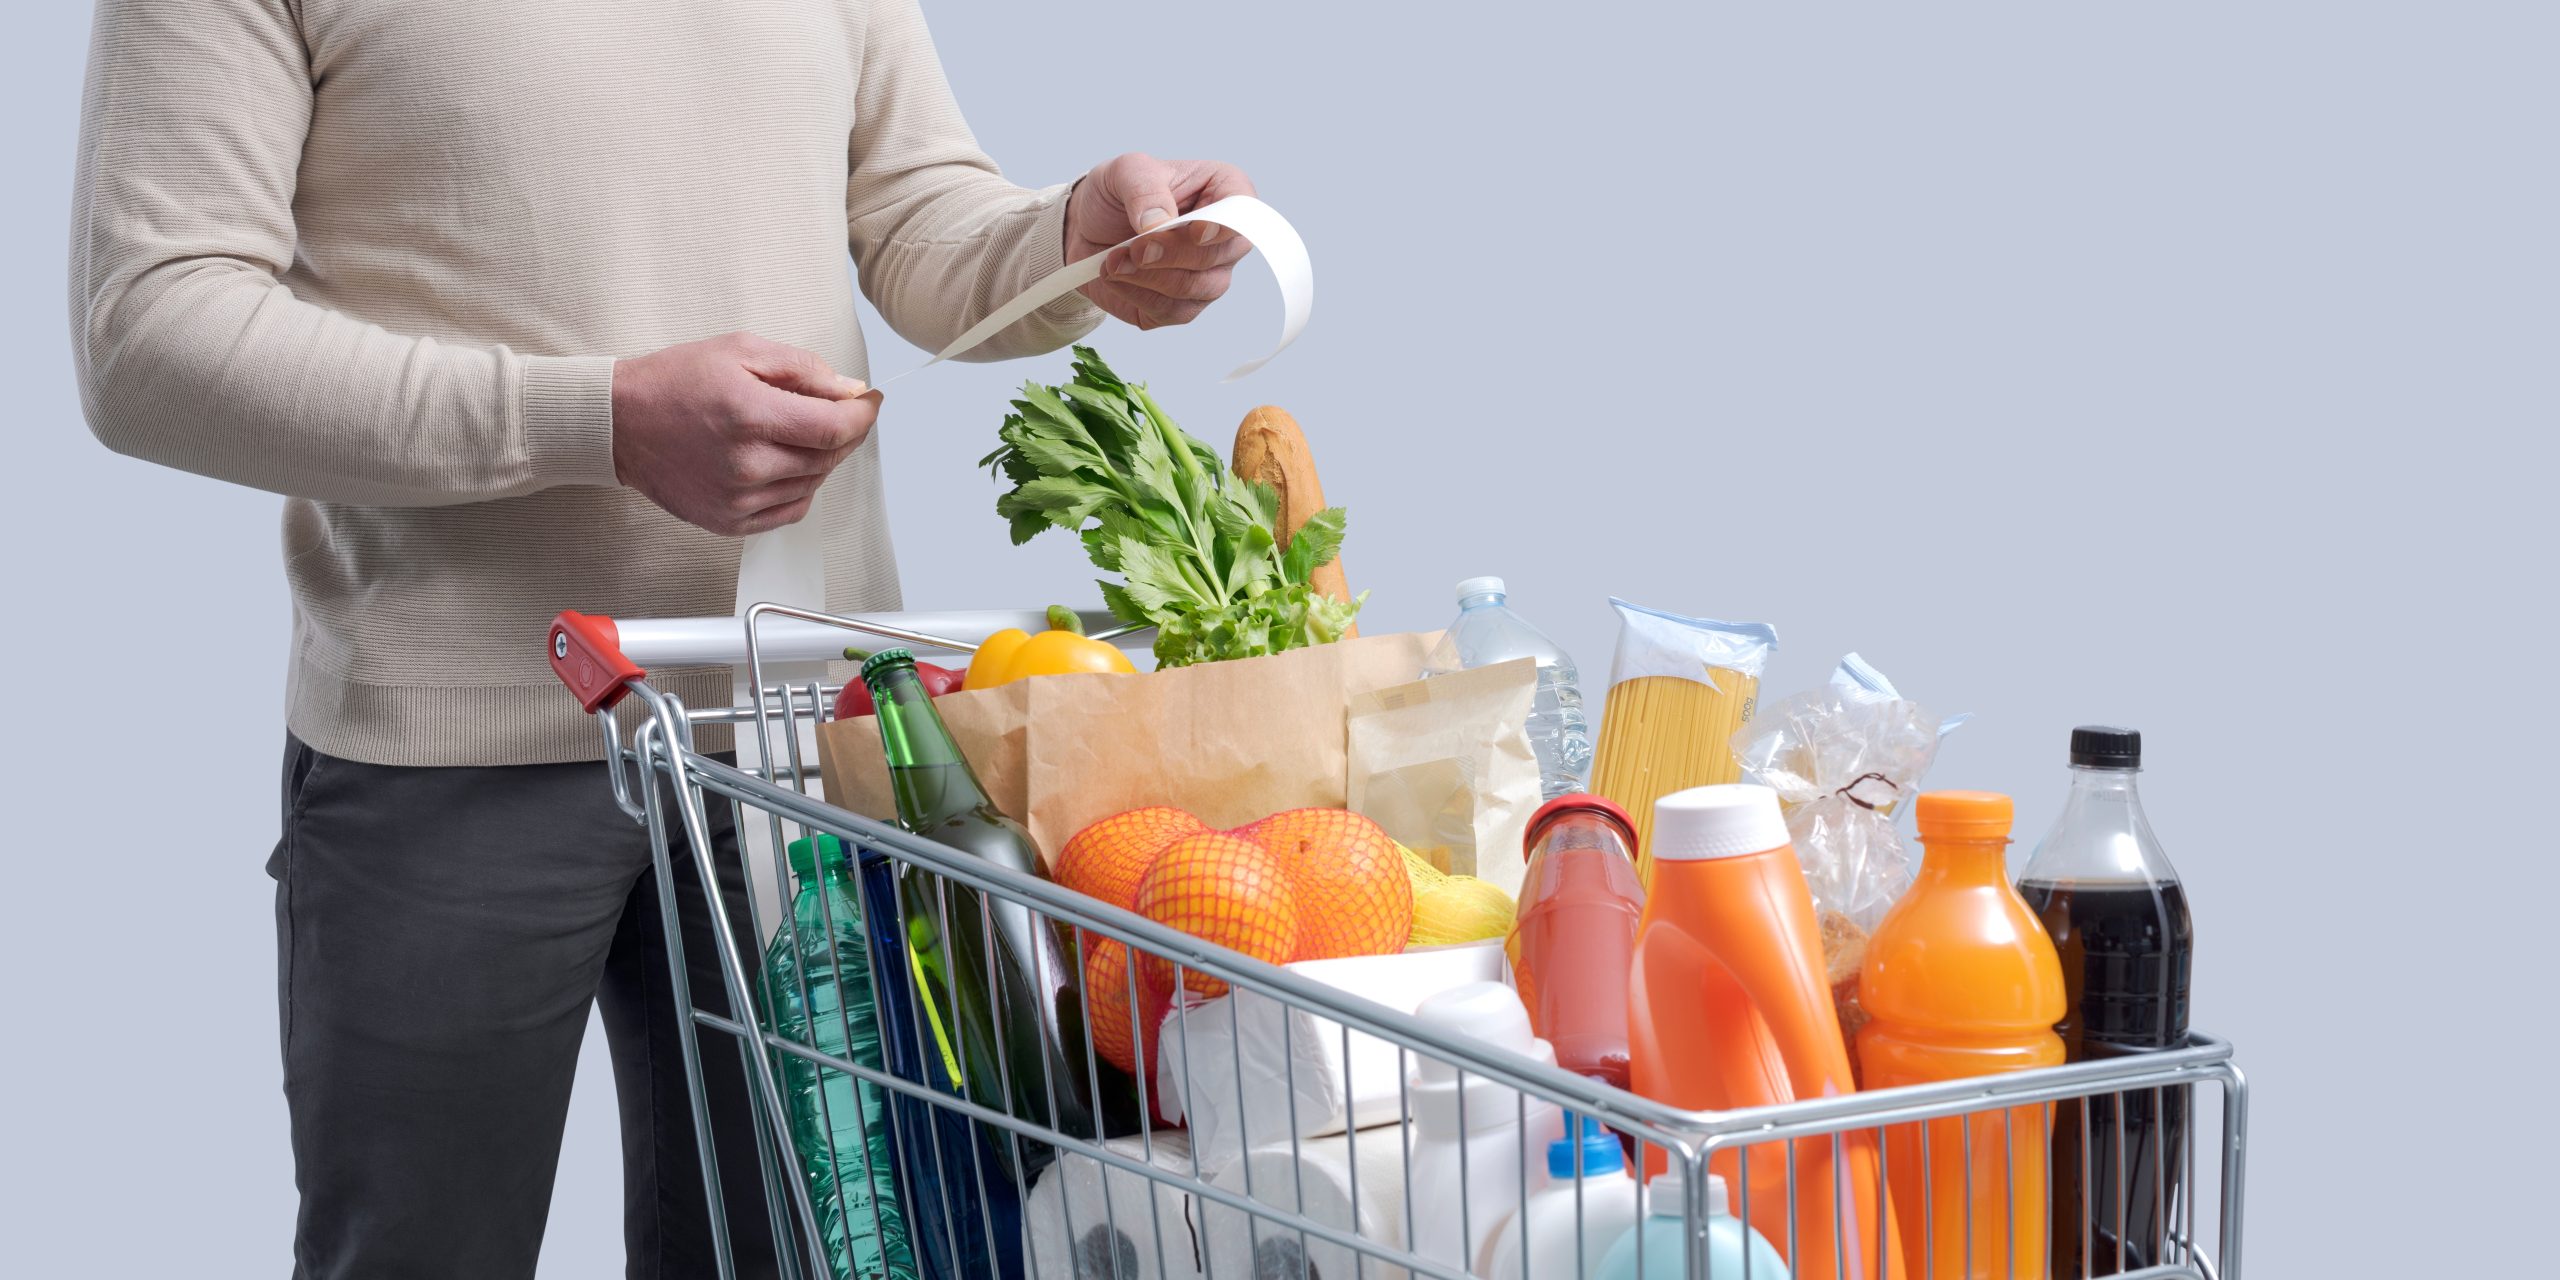 Further ease in grocery price inflation but shoppers still feeling pressure